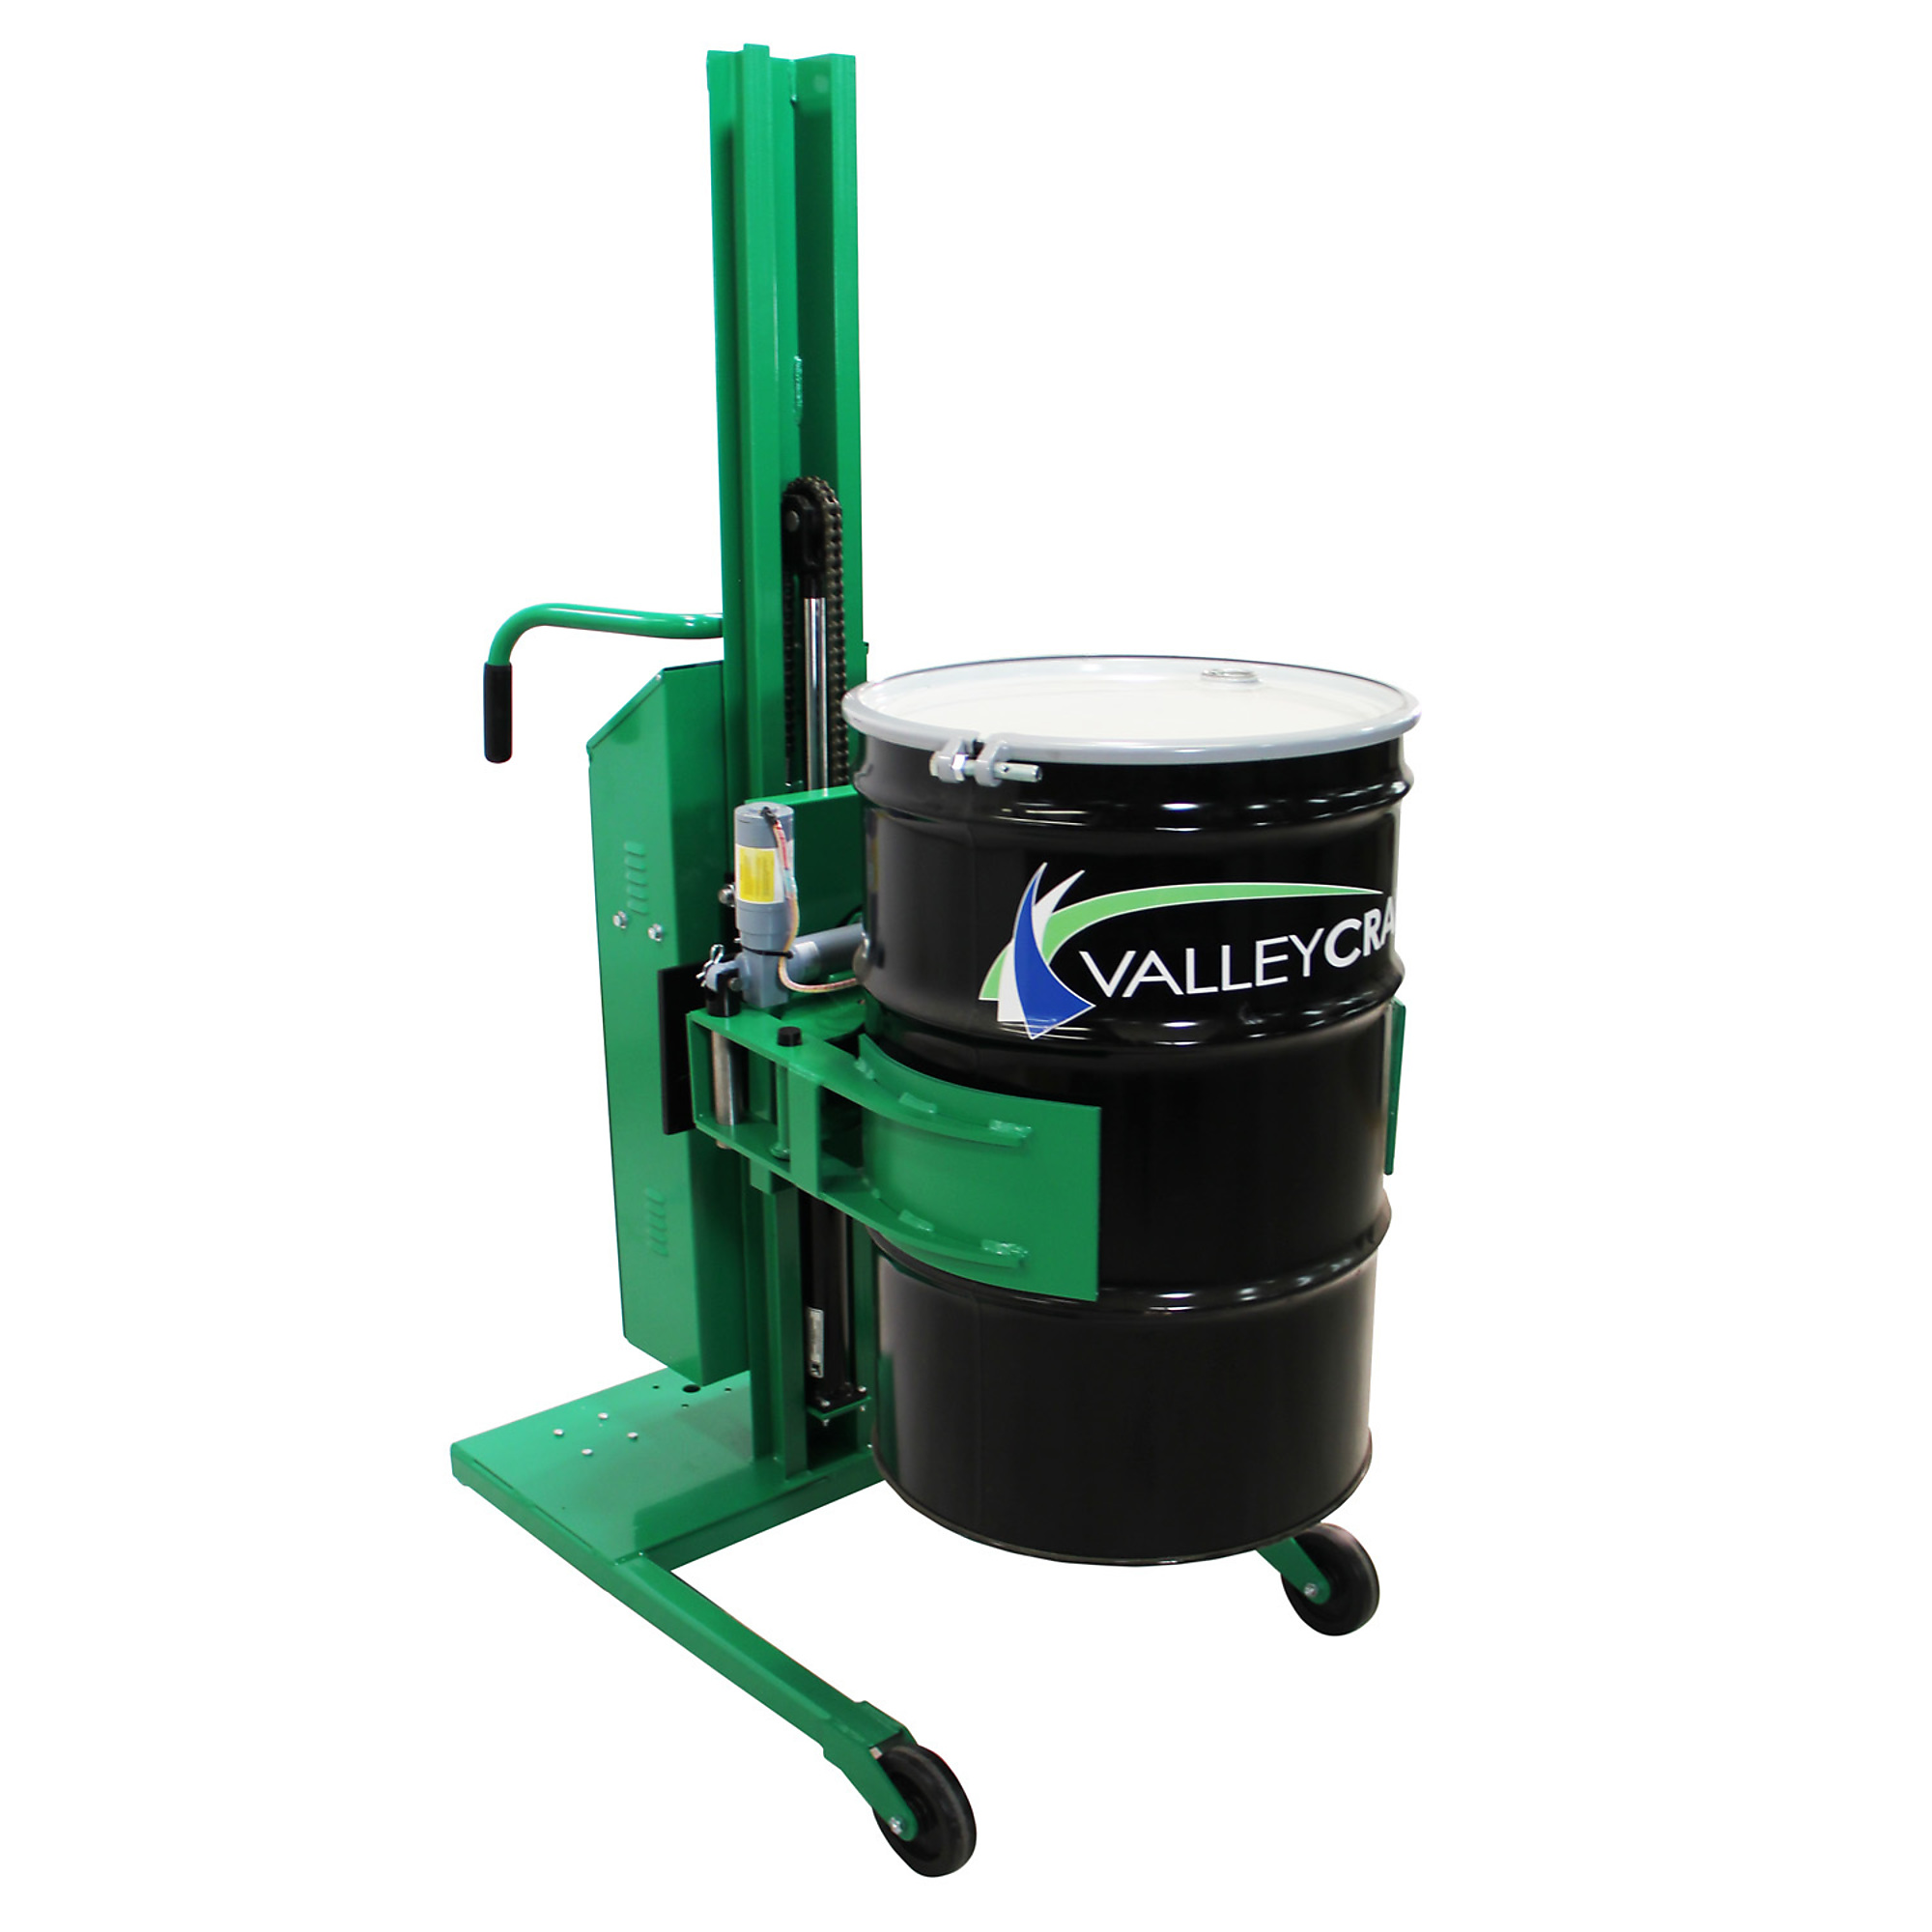 Valley Craft, Drum Lift Rotator, Semi-Powered, Battery Included, Capacity 800 lb, Model F88586C2